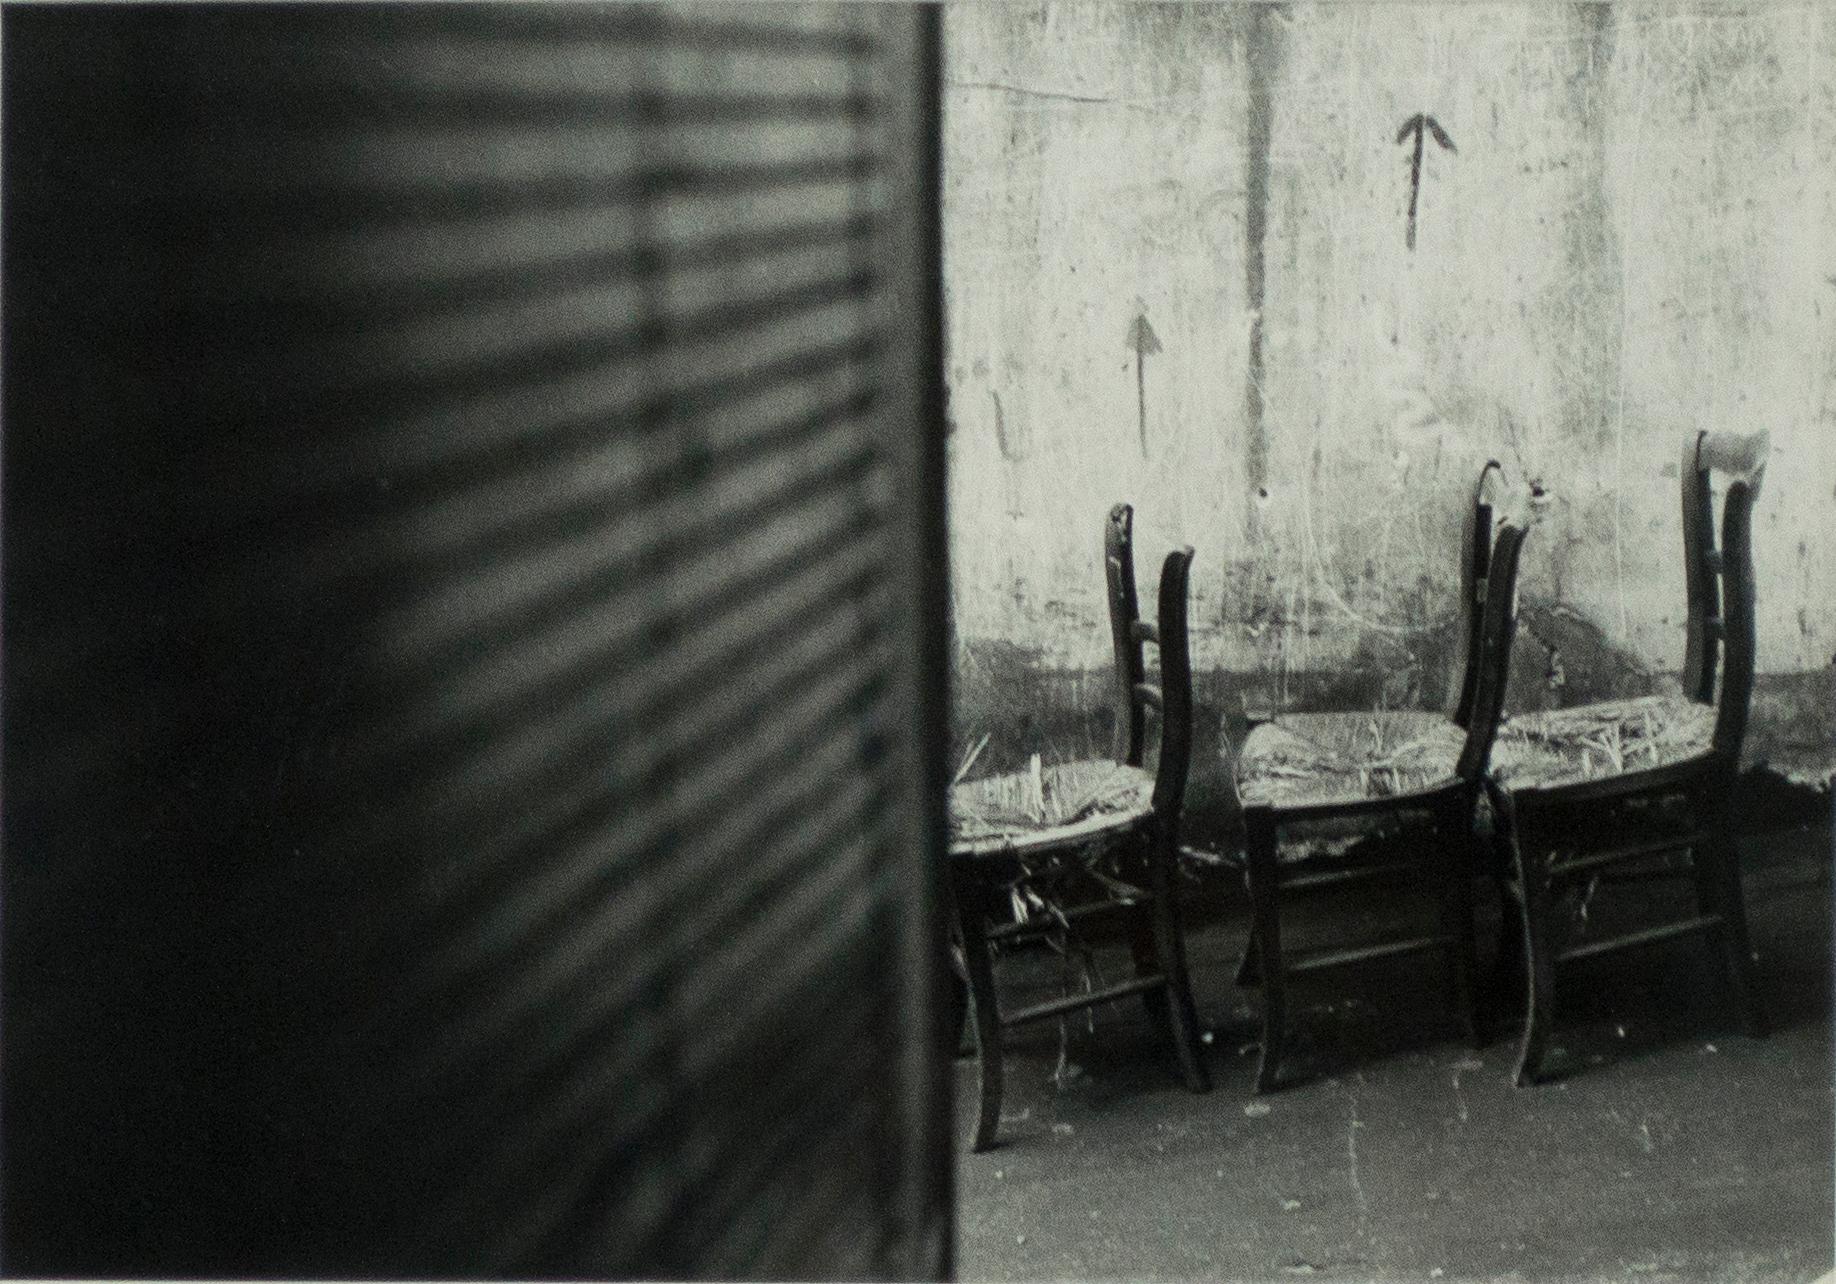 This image of empty broken chairs in a deserted alley is reminiscent of the work of Eugene Atget, who was capturing the streets of Paris over a 30 year period at the beginning of the 20th century. His work was highly prized by the surrealists who